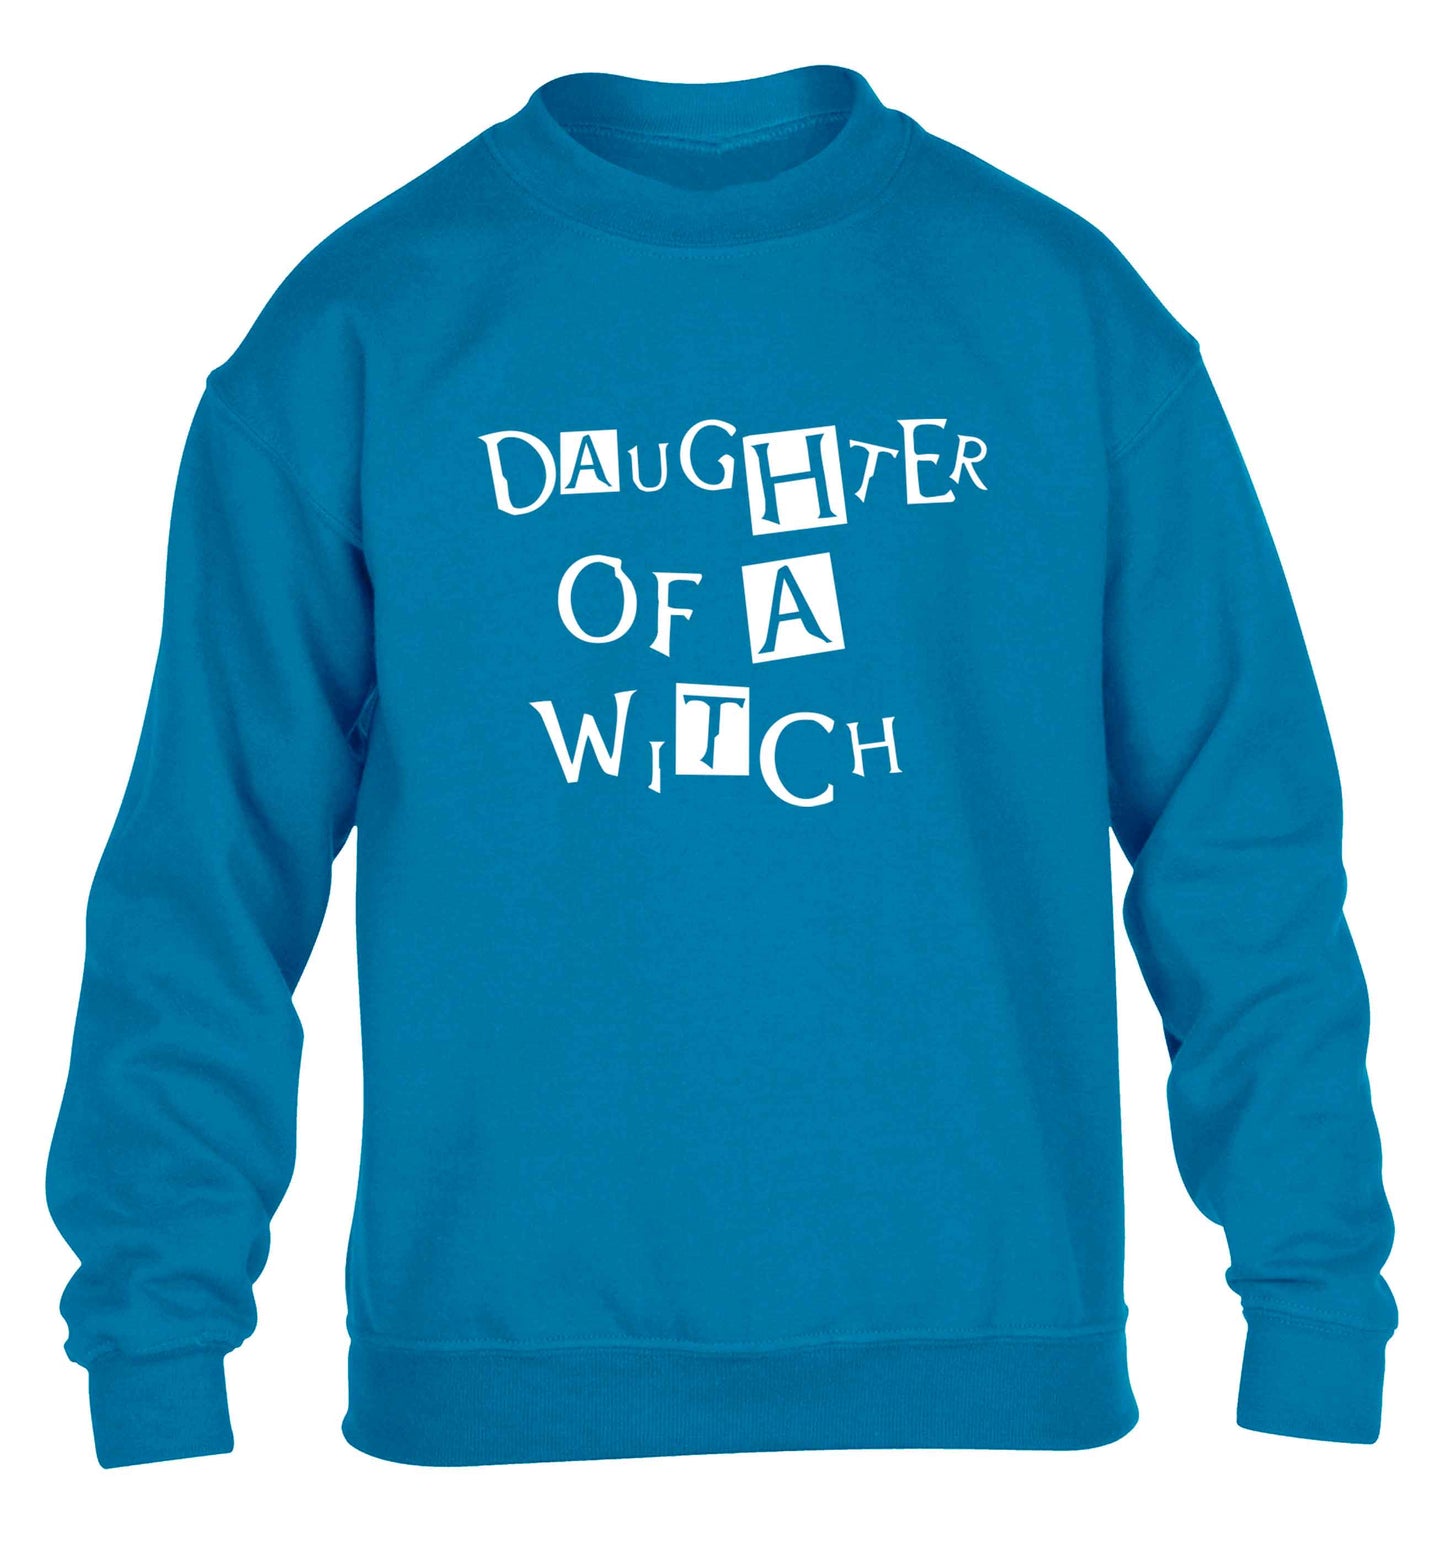 Daughter of a witch children's blue sweater 12-13 Years